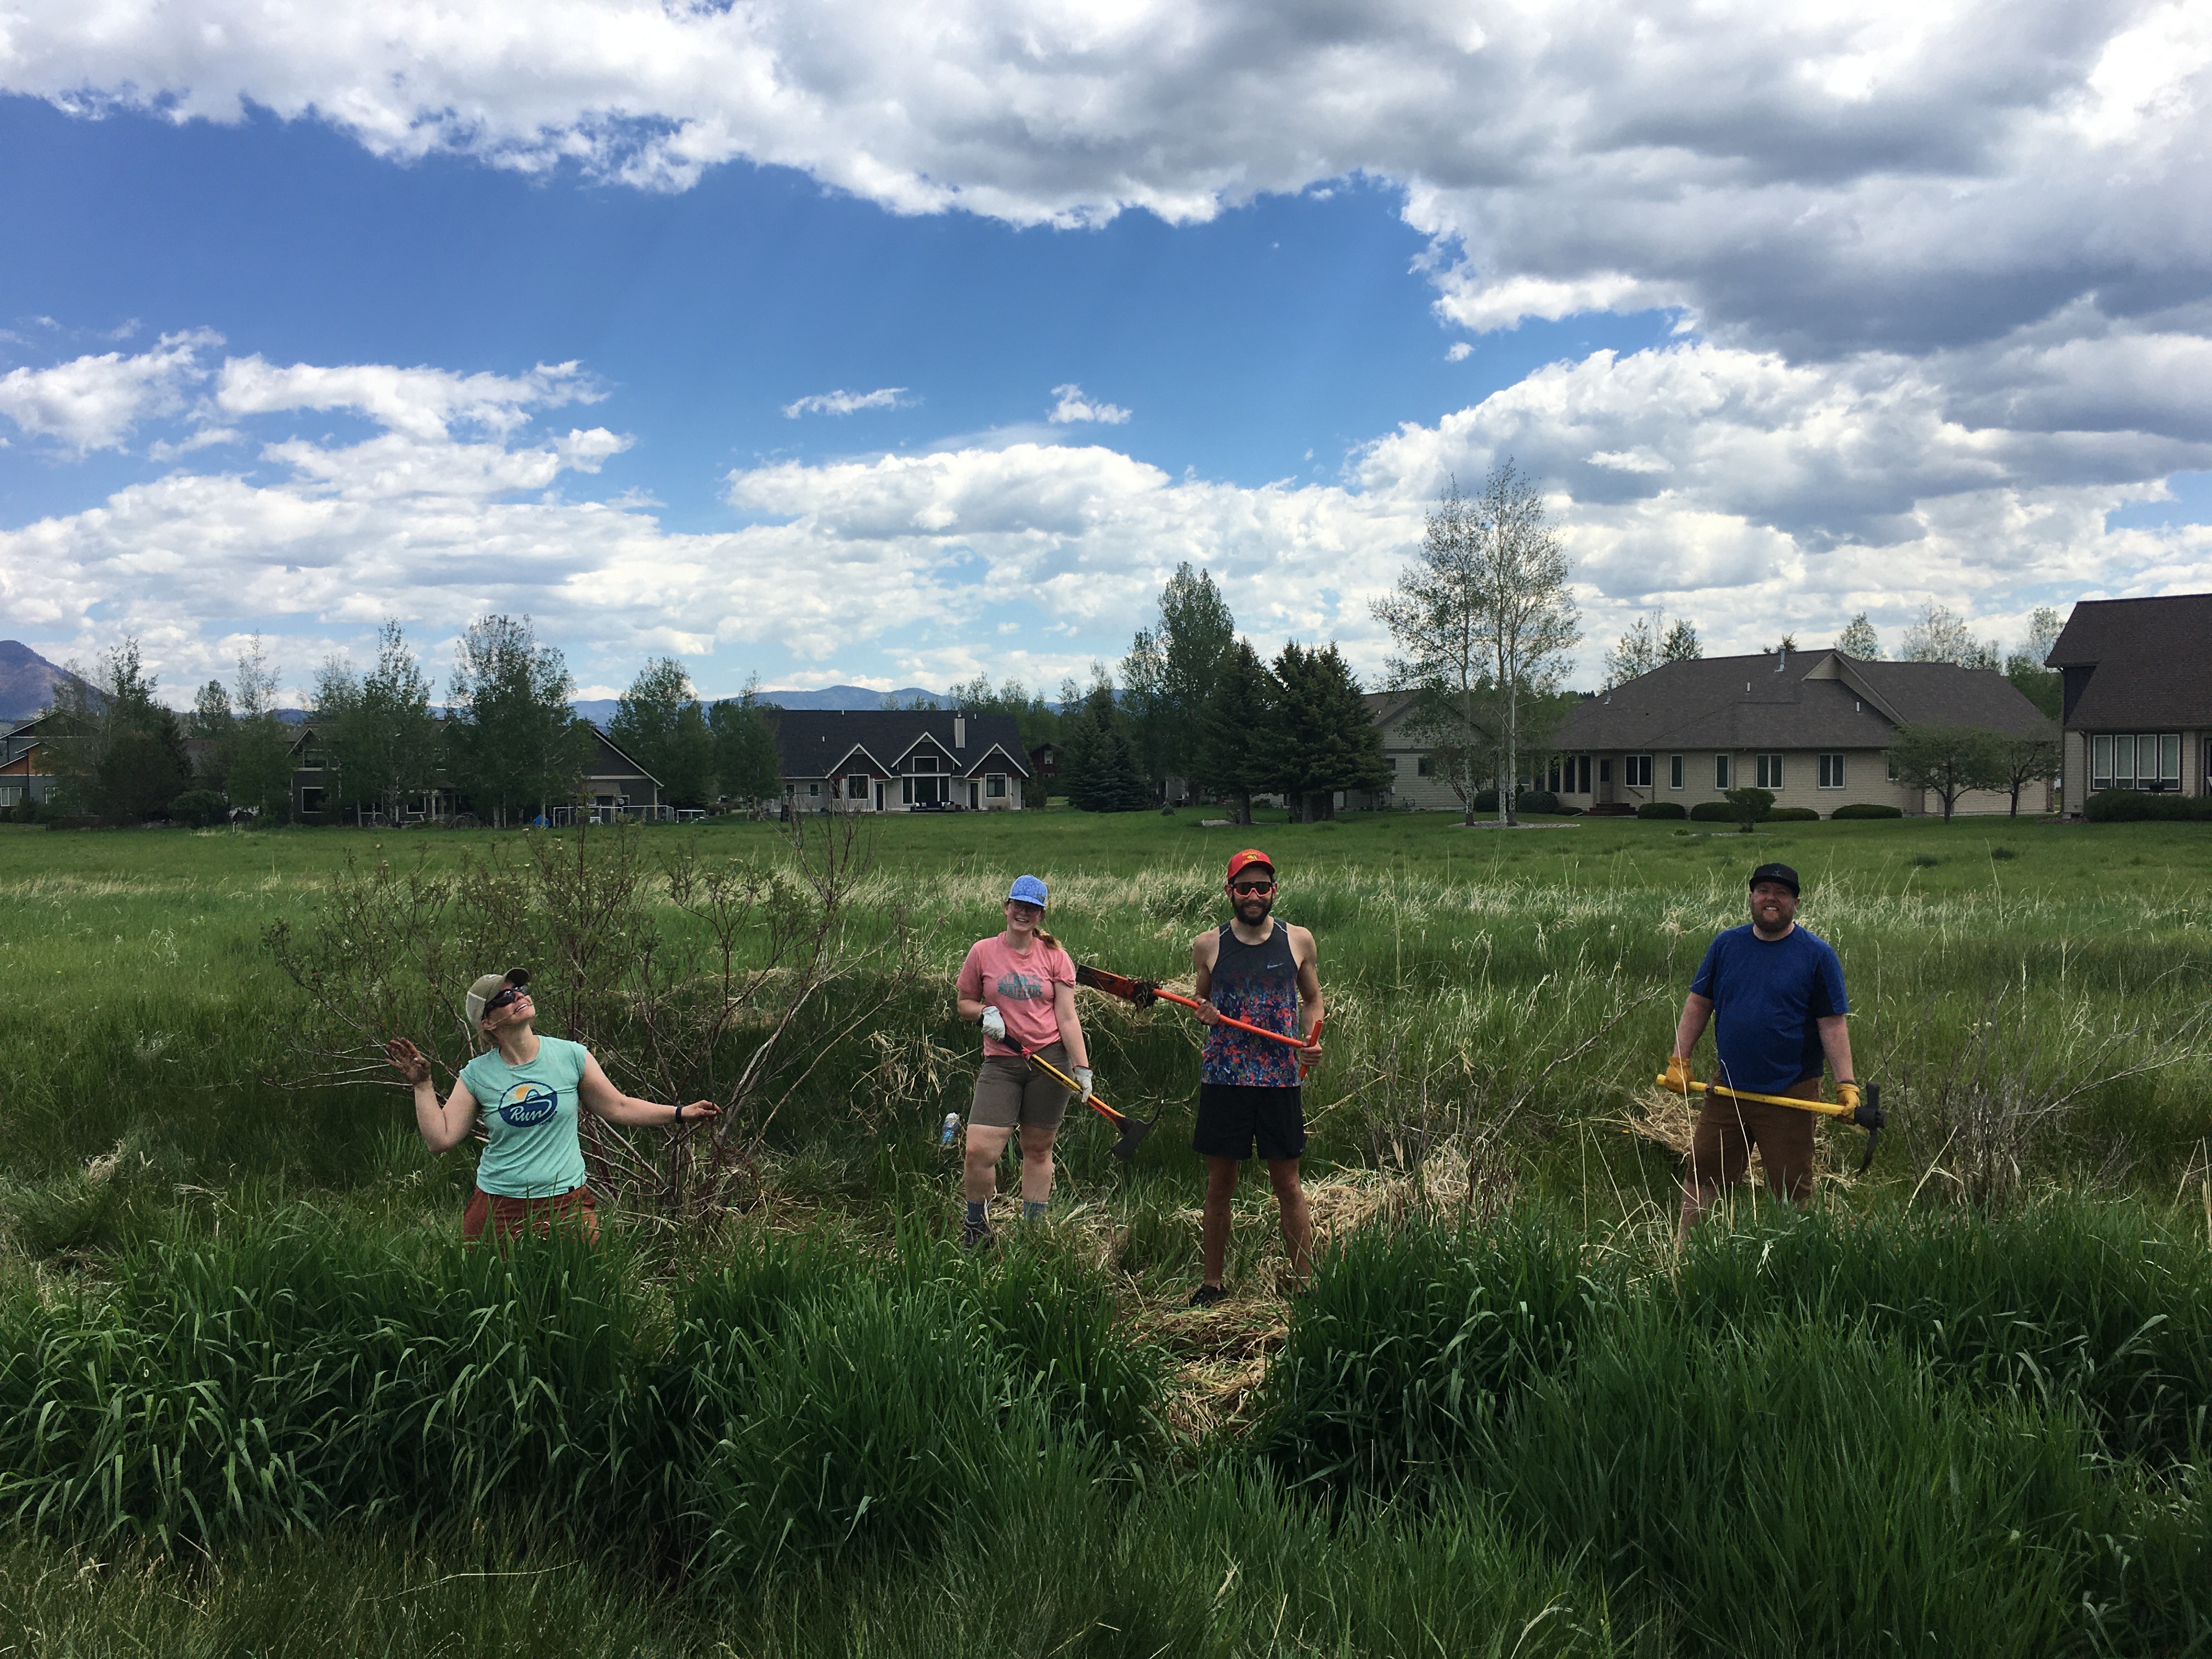 Planting bare root willows in the bank of an impaired stream in Bozeman, Montana on National Trails Day 2021.